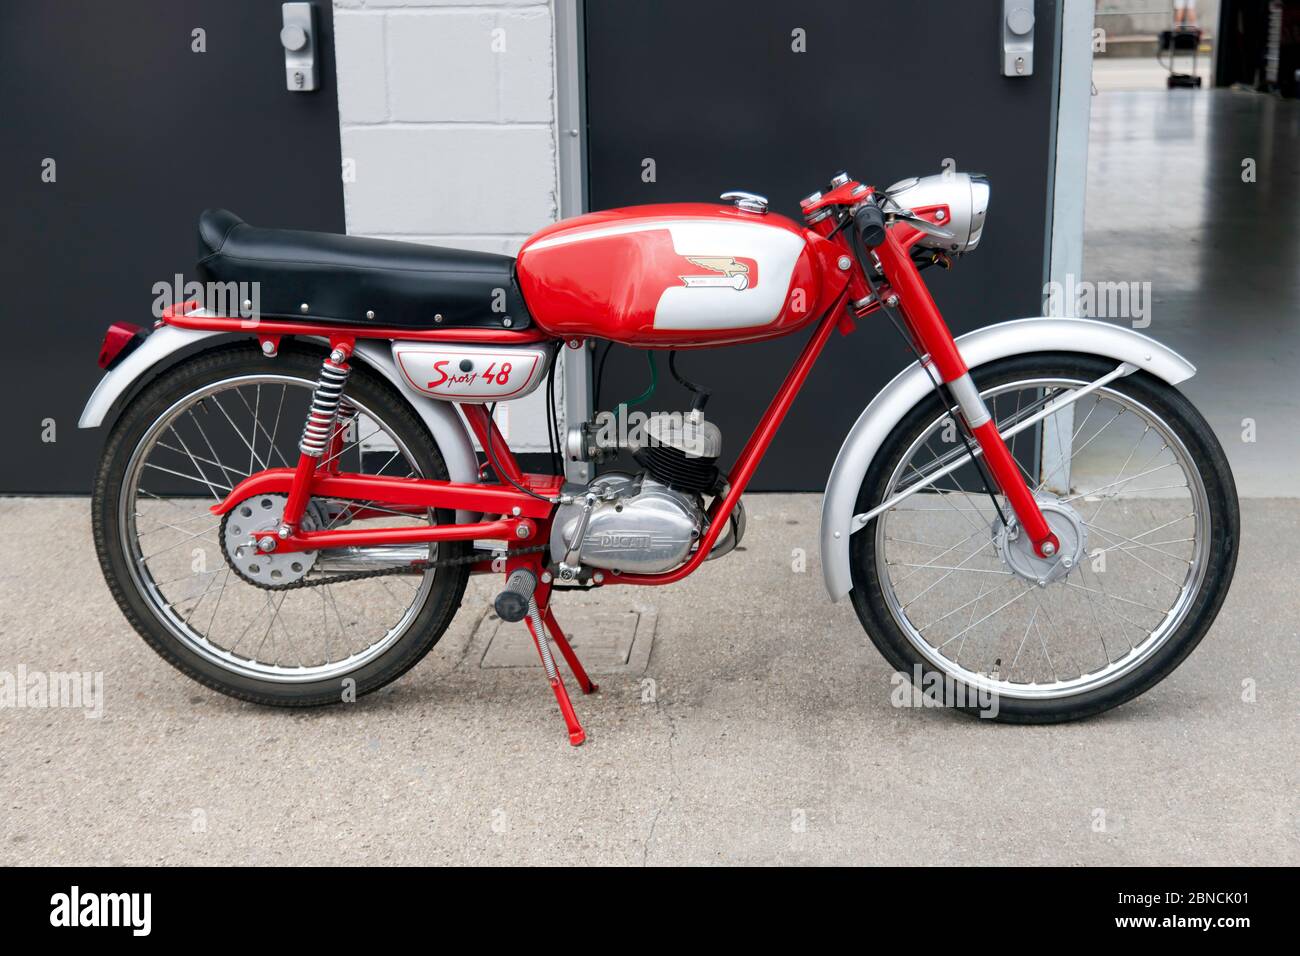 Side view of a Ducati Sport 48 Motorcycle, in the International Paddock at  the 2019 Silverstone Classic Stock Photo - Alamy